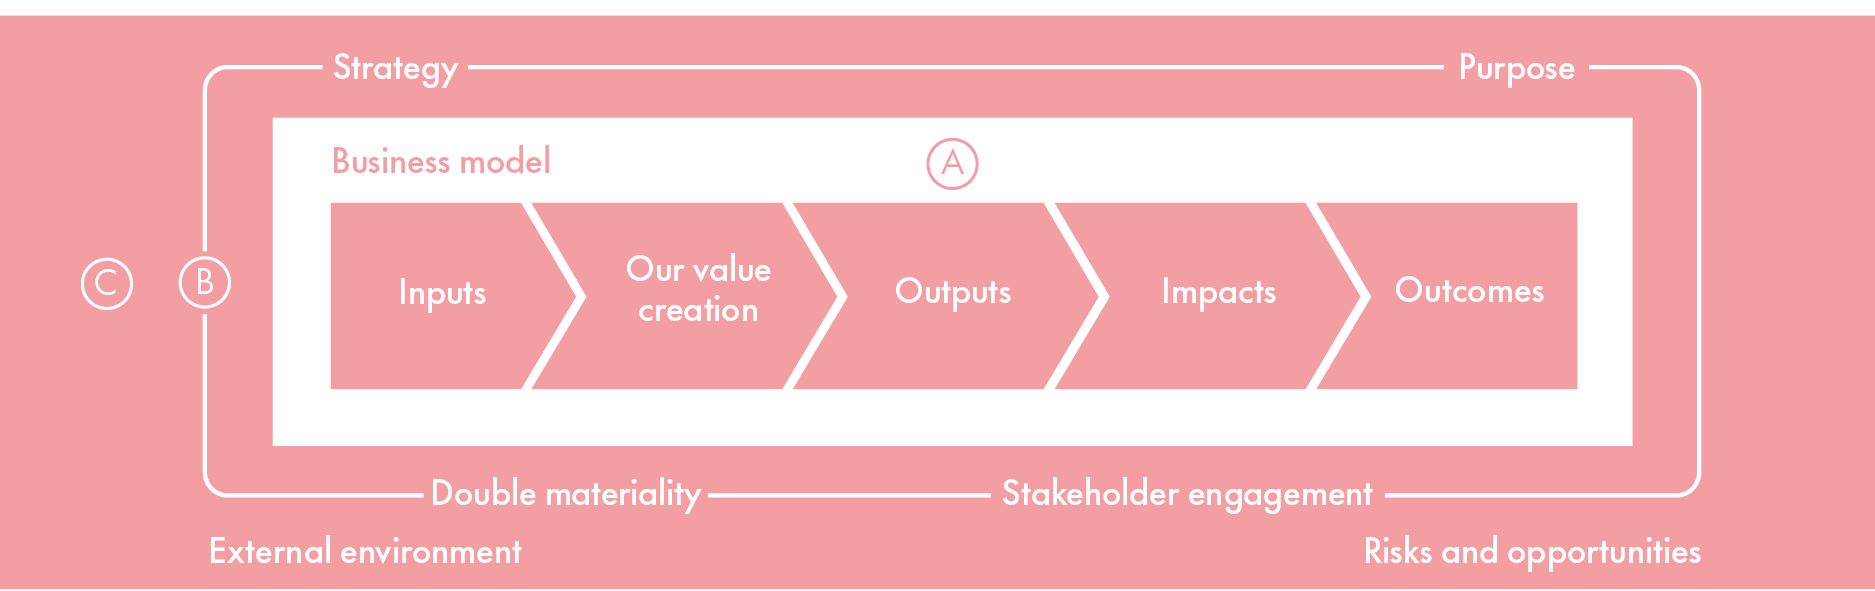 Our value creation story